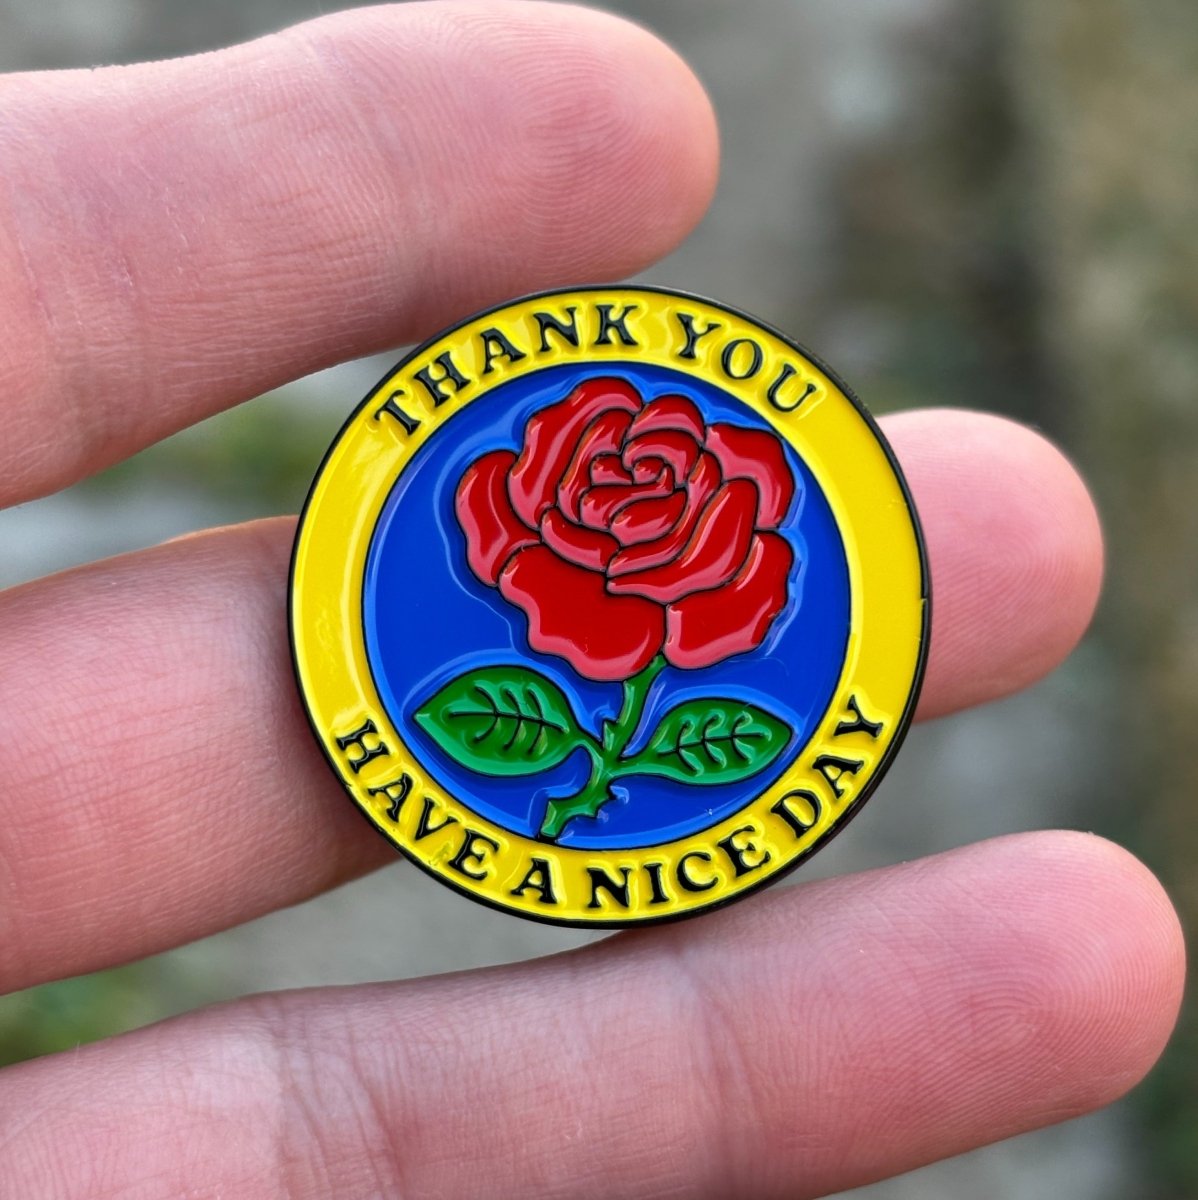 Thank you have a nice day pin - Enamel Pin - Pretty Bad Co.